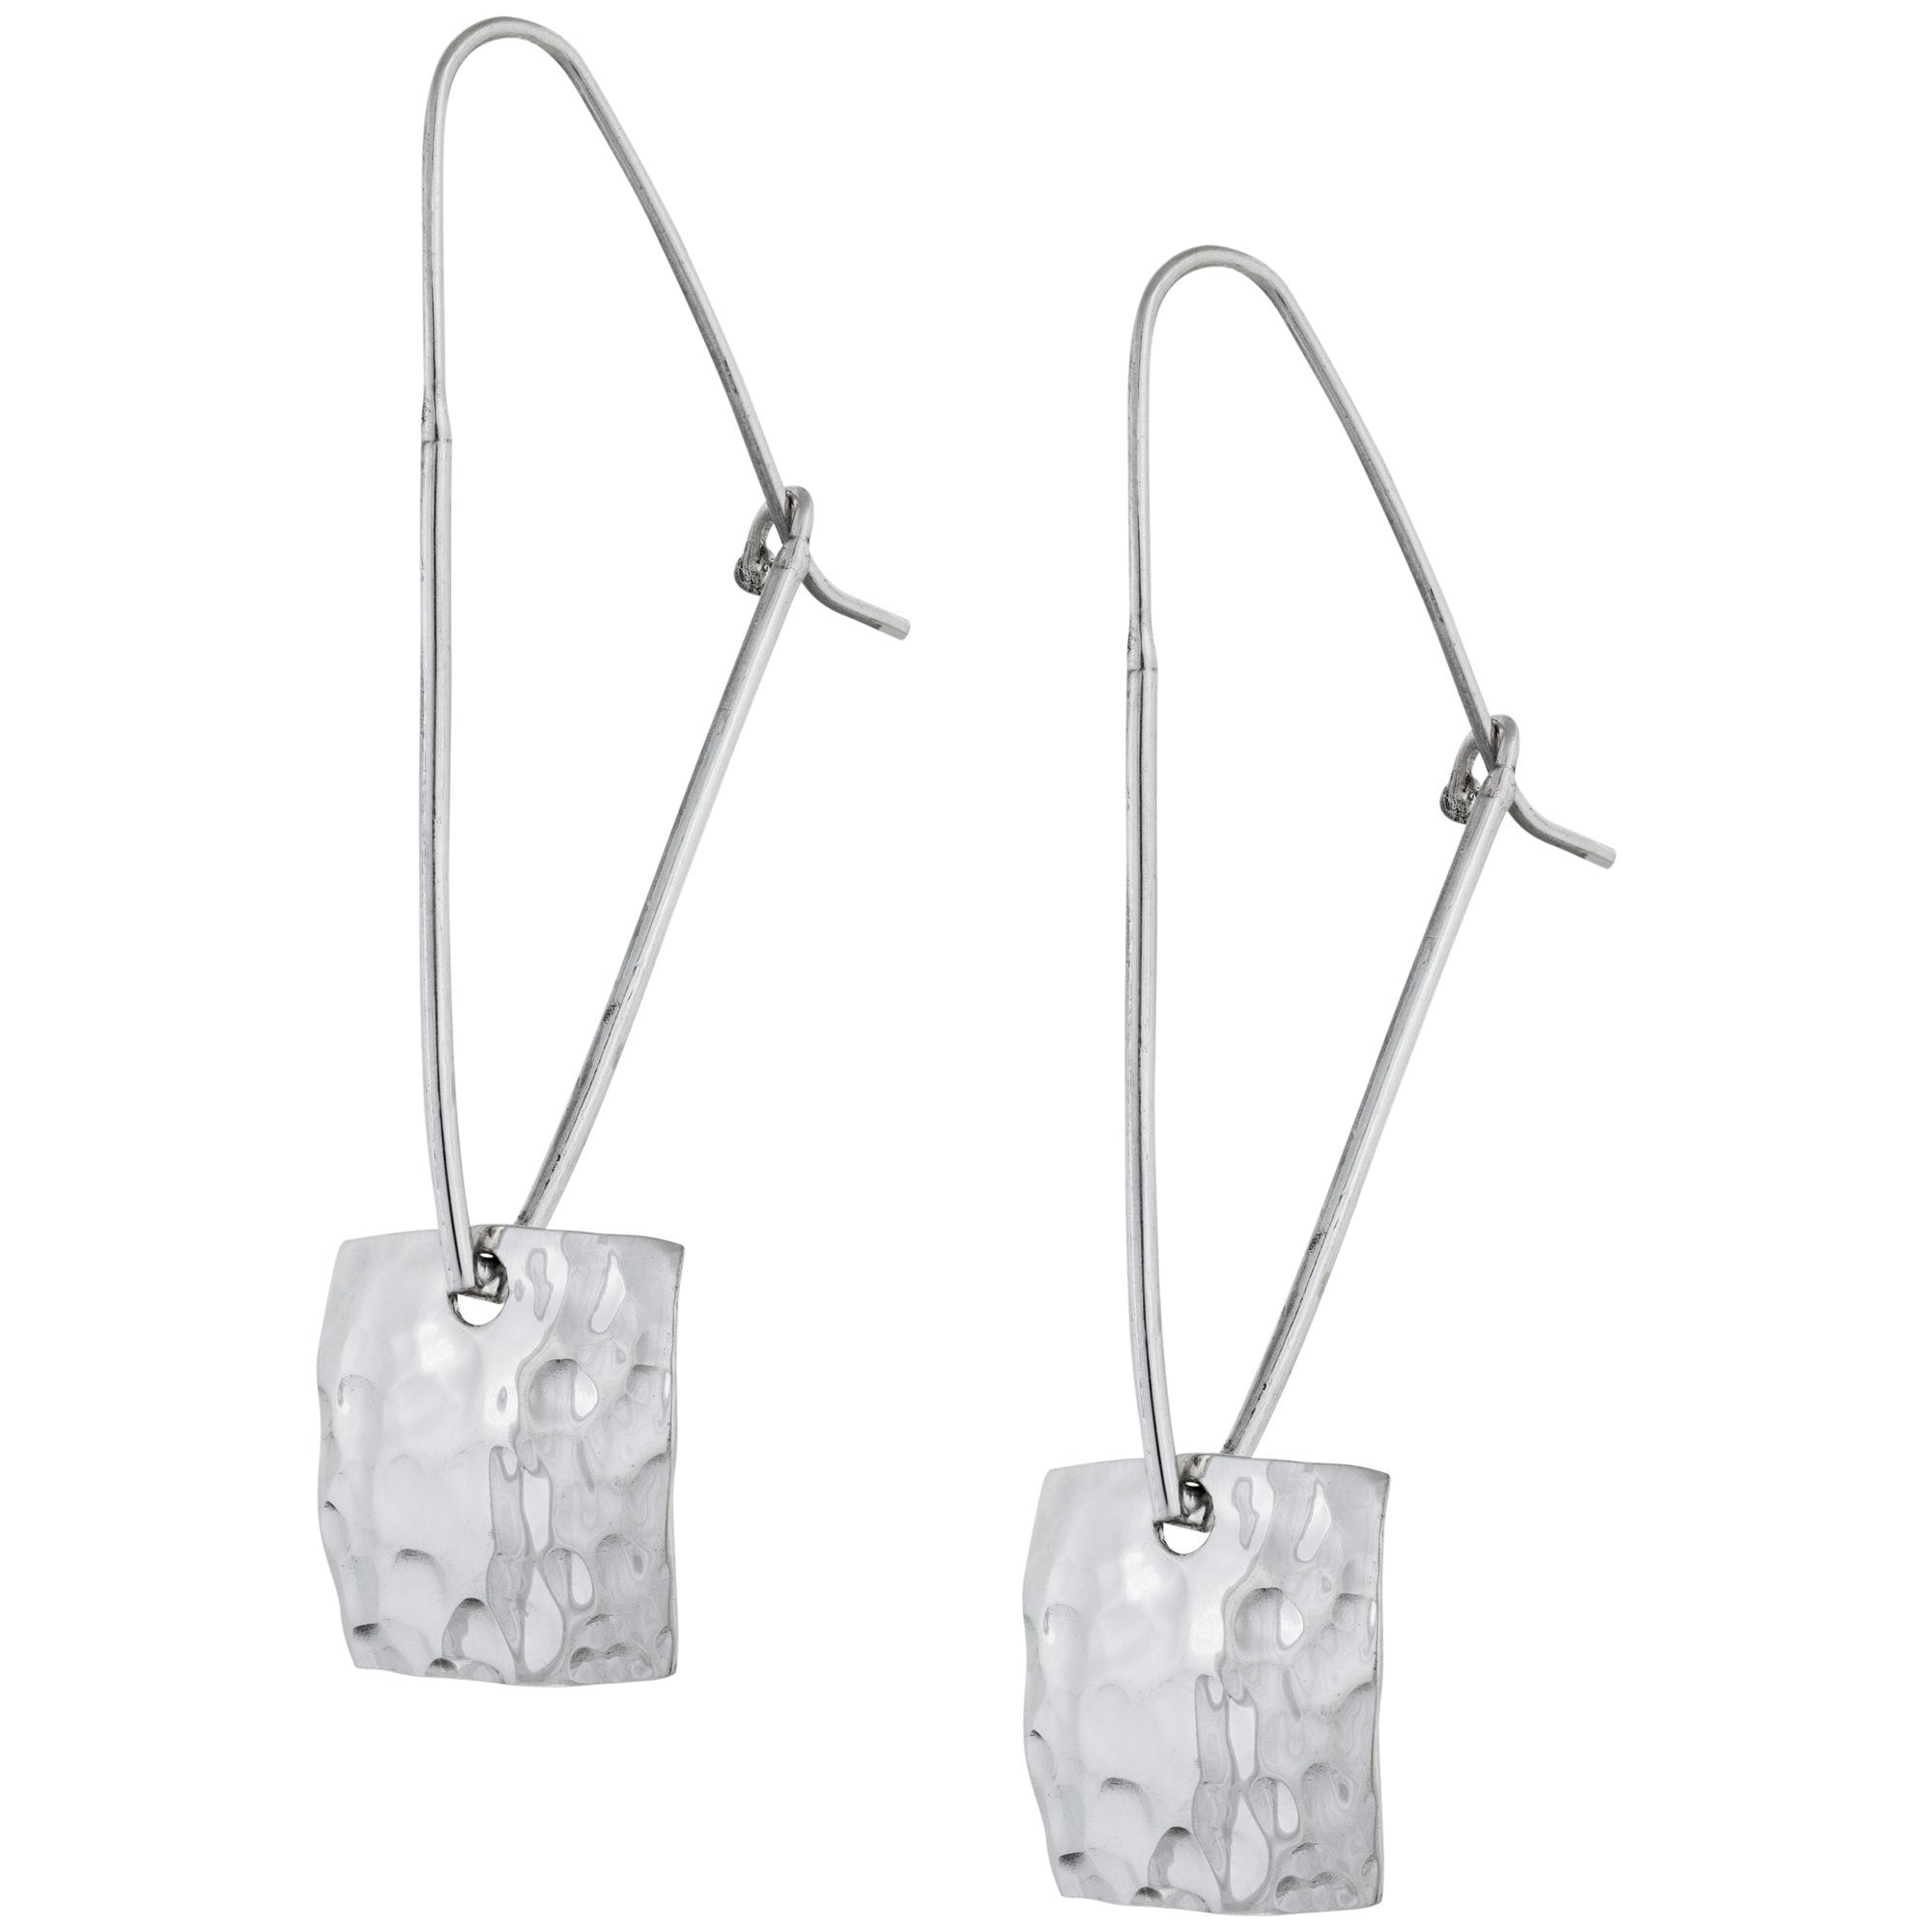 Four Corners Sterling Silver Earrings - Midday